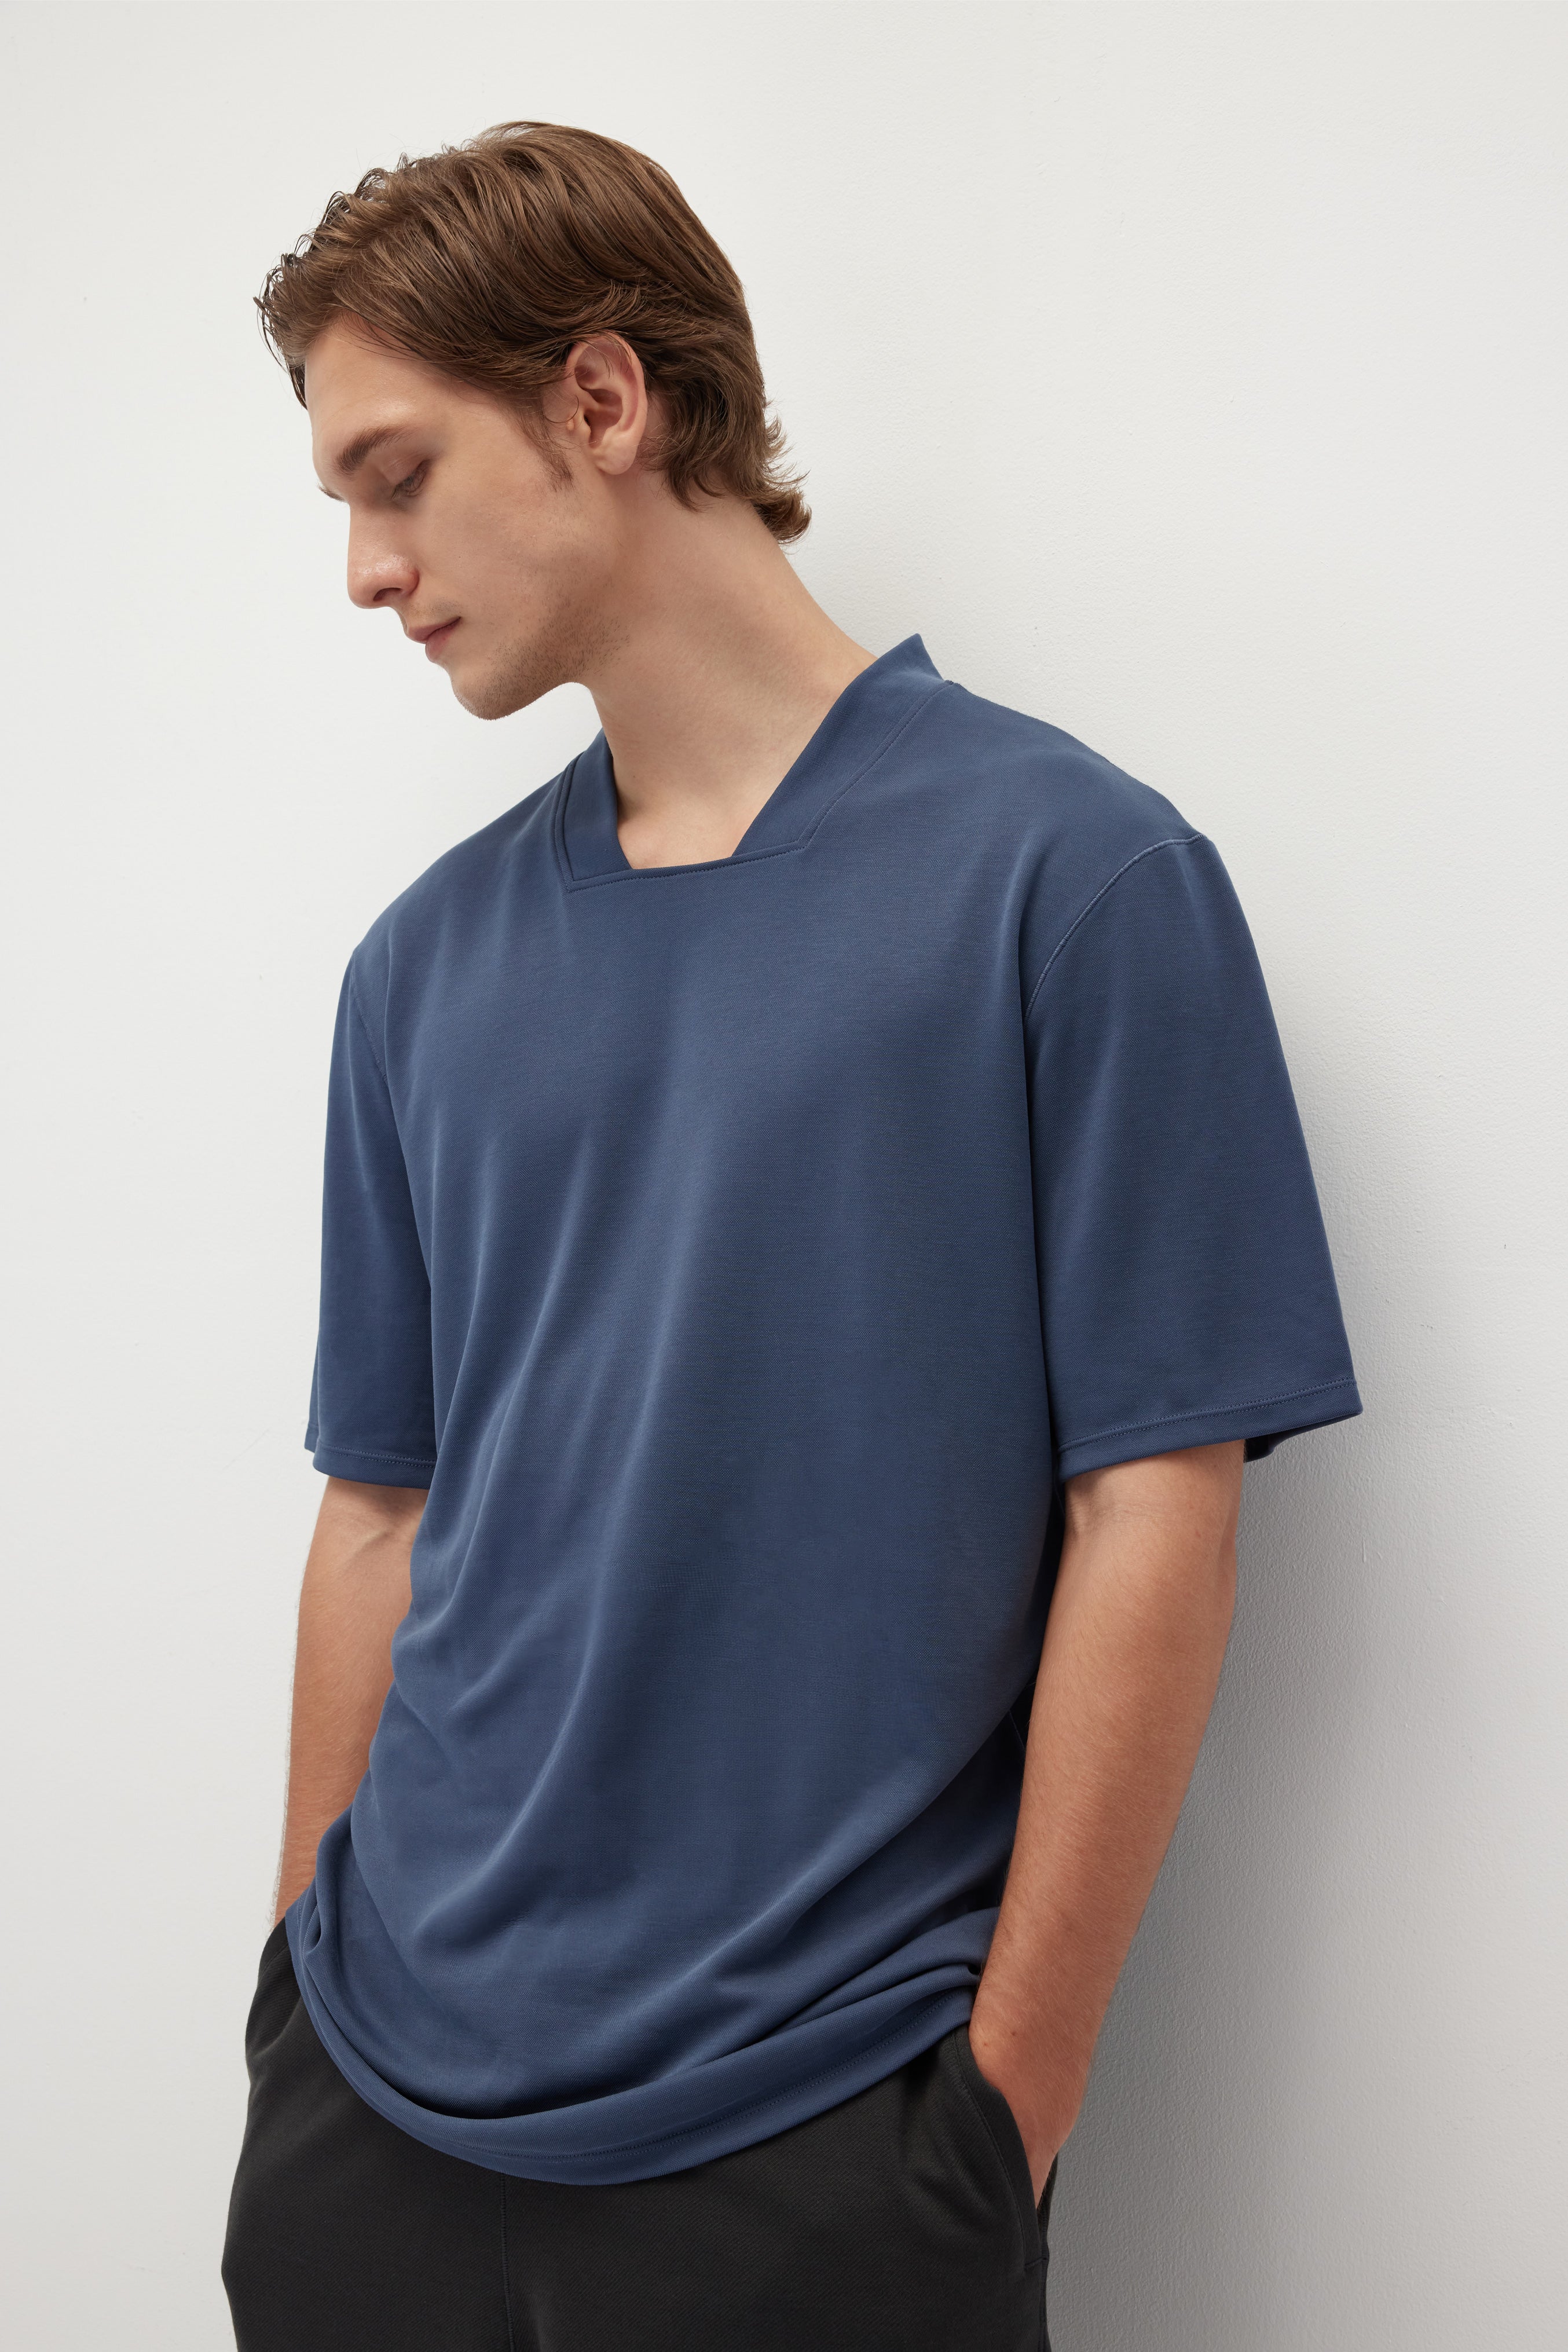 Suede Modal Square-Collar T-Shirt